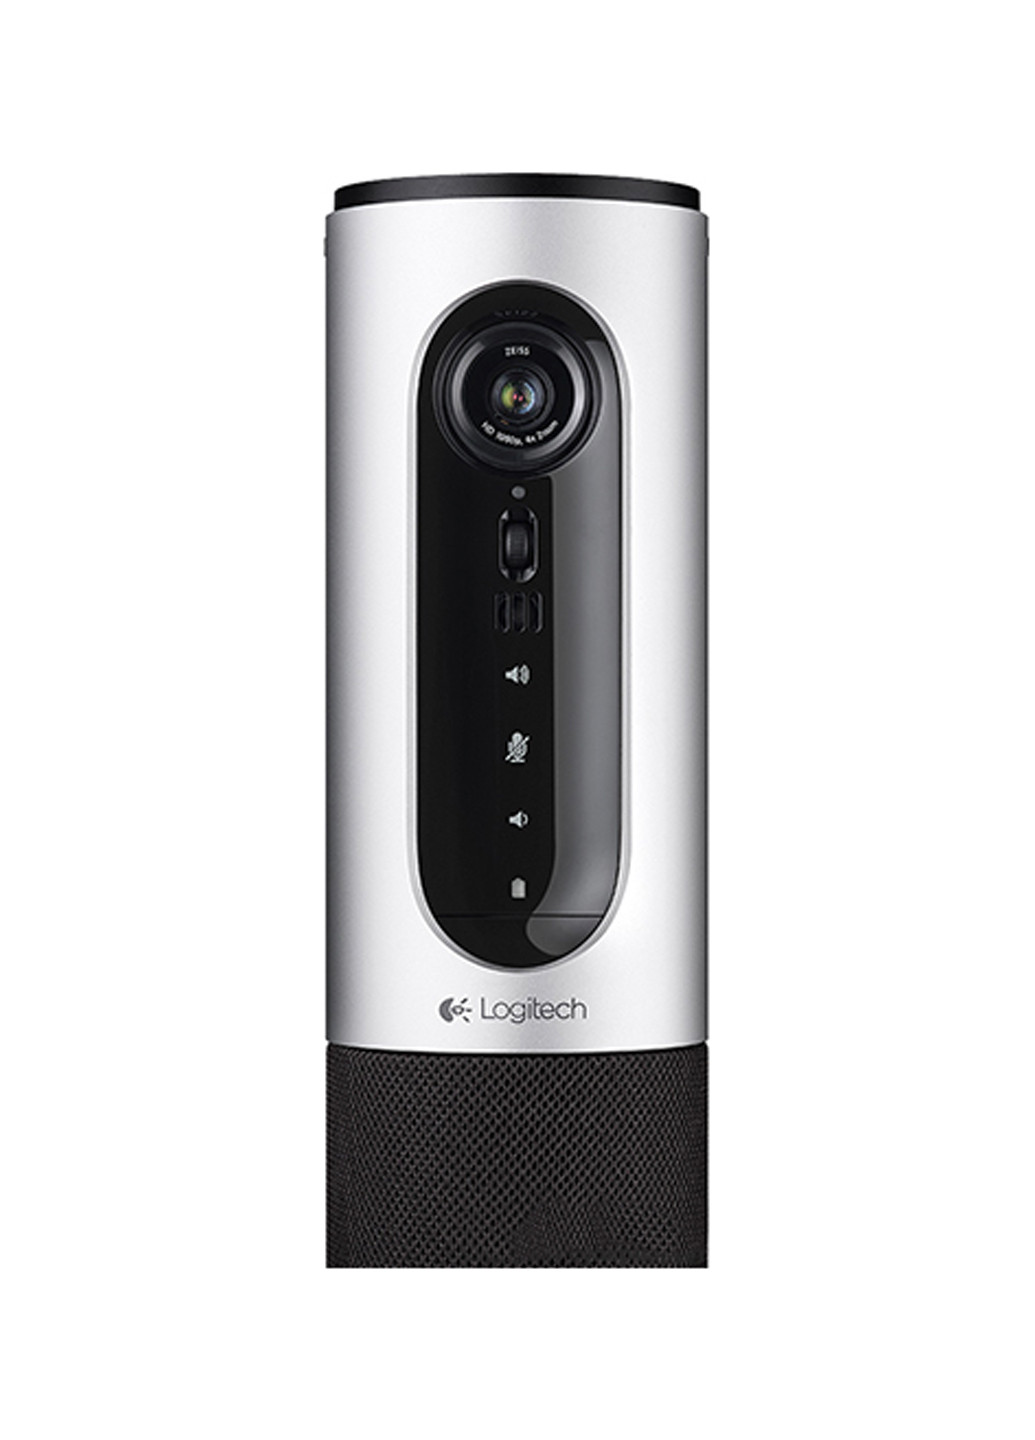 Веб-камера Logitech conferencecam connect silver (960-001034) (135495746)